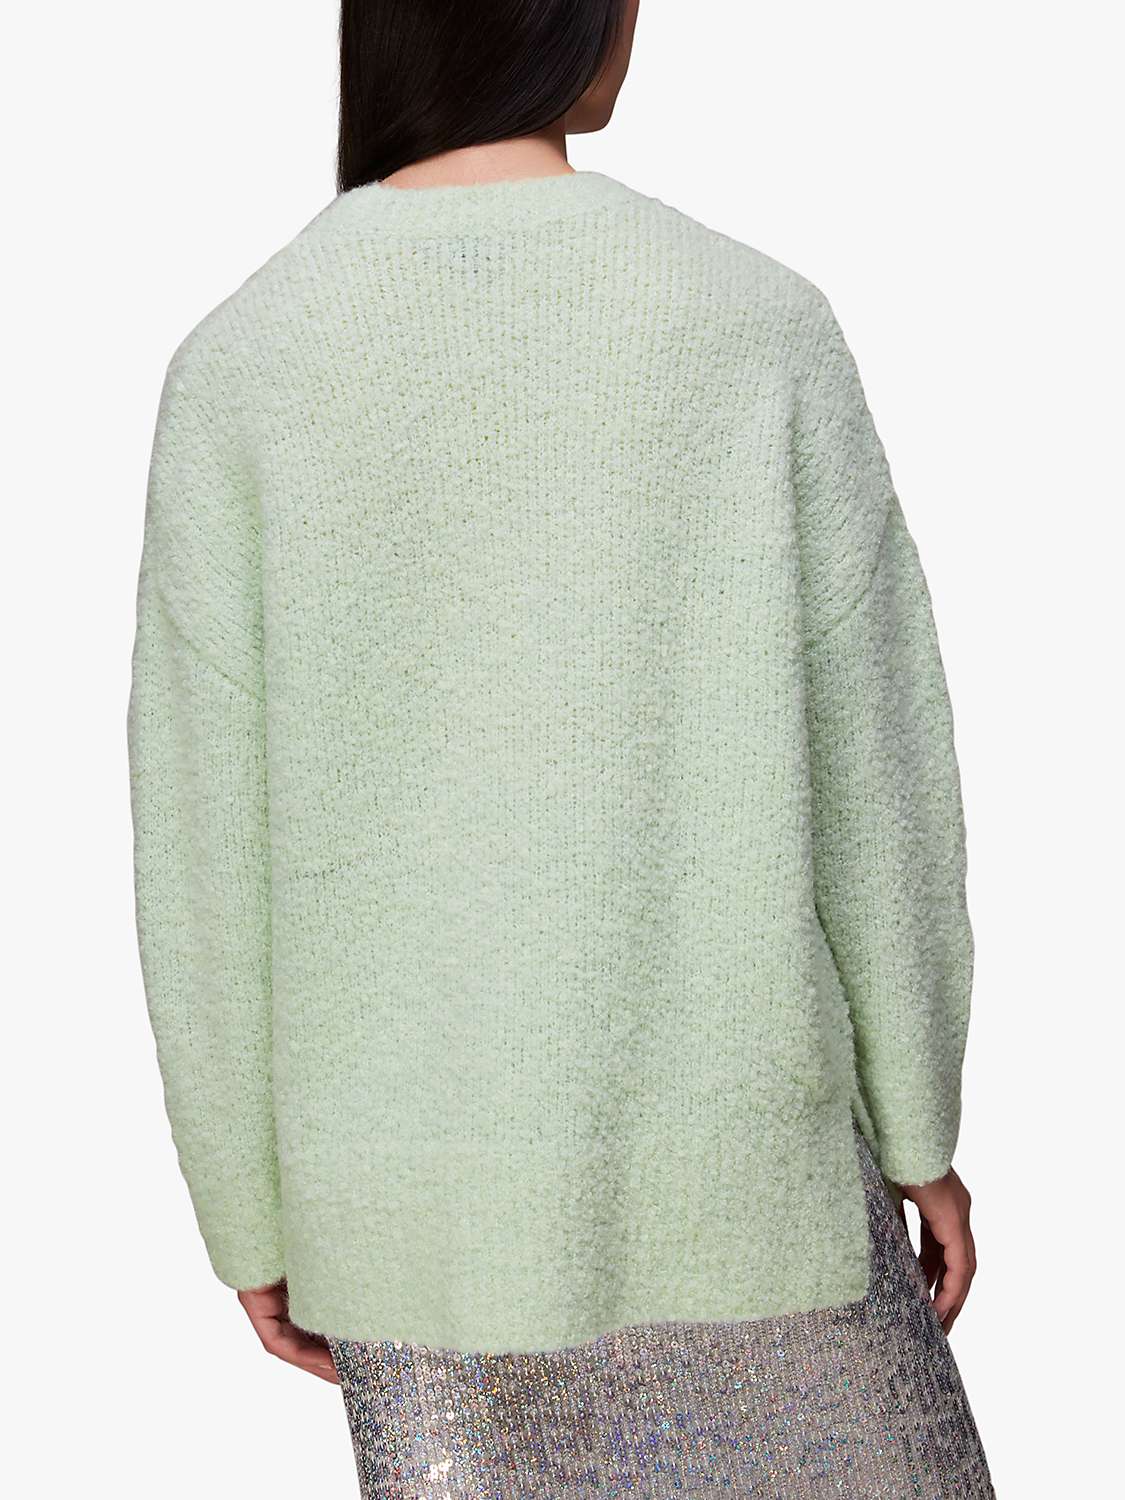 Buy Whistles Relaxed Boucle Wool Blend Jumper Online at johnlewis.com